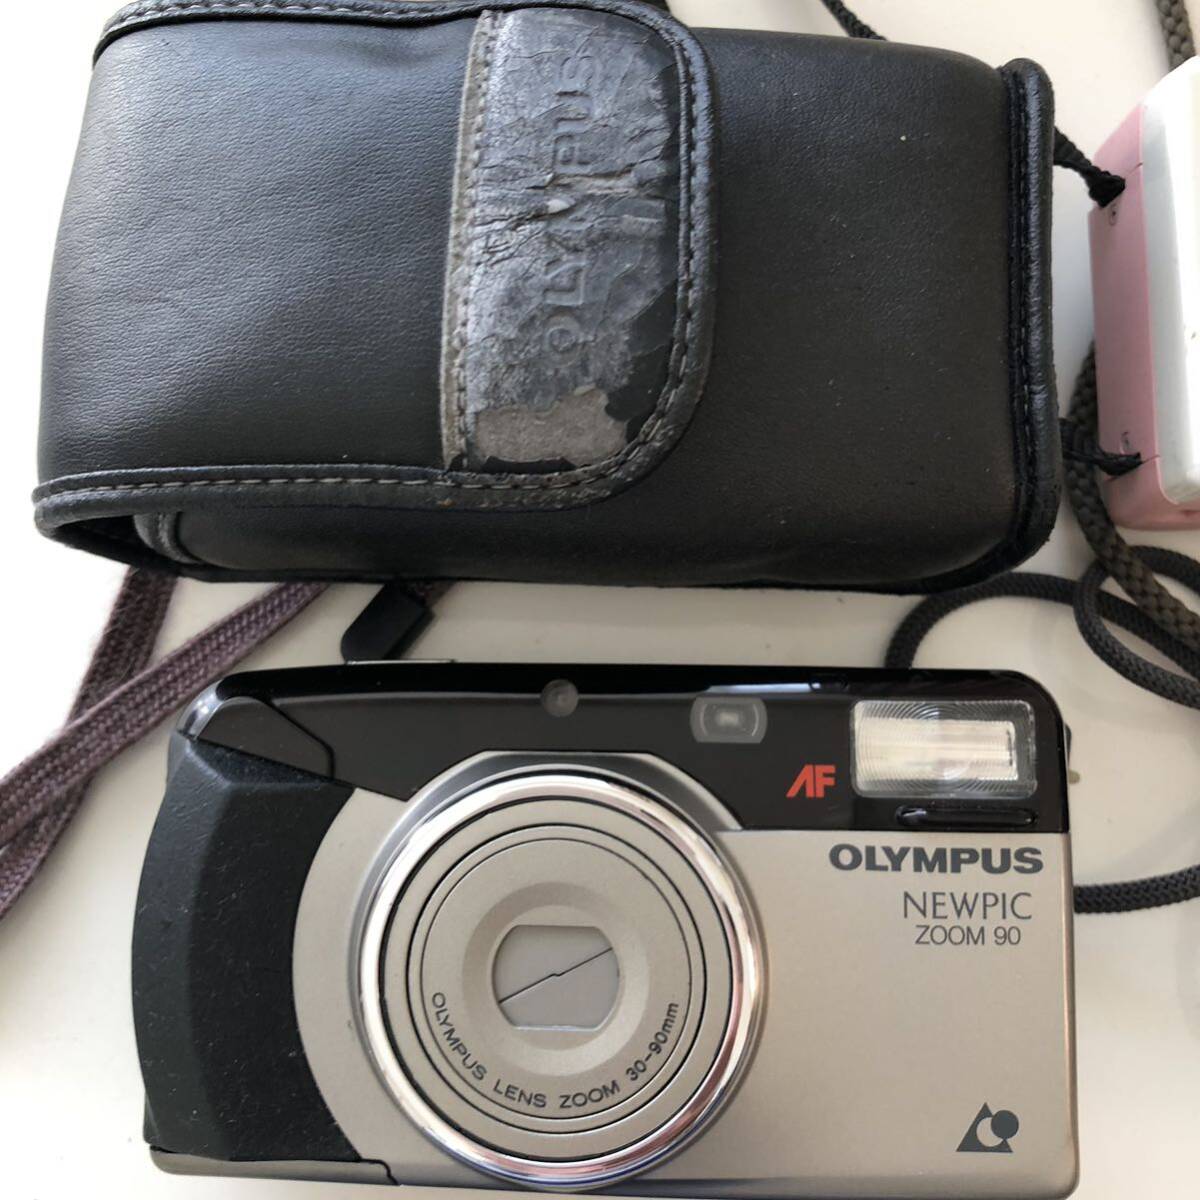 CANON Autoboy A オリンパス　AF-1　AF-10 ZOOM90 ミノルタ　af-s courreges　他　コンパクトカメラまとめ７台_画像2